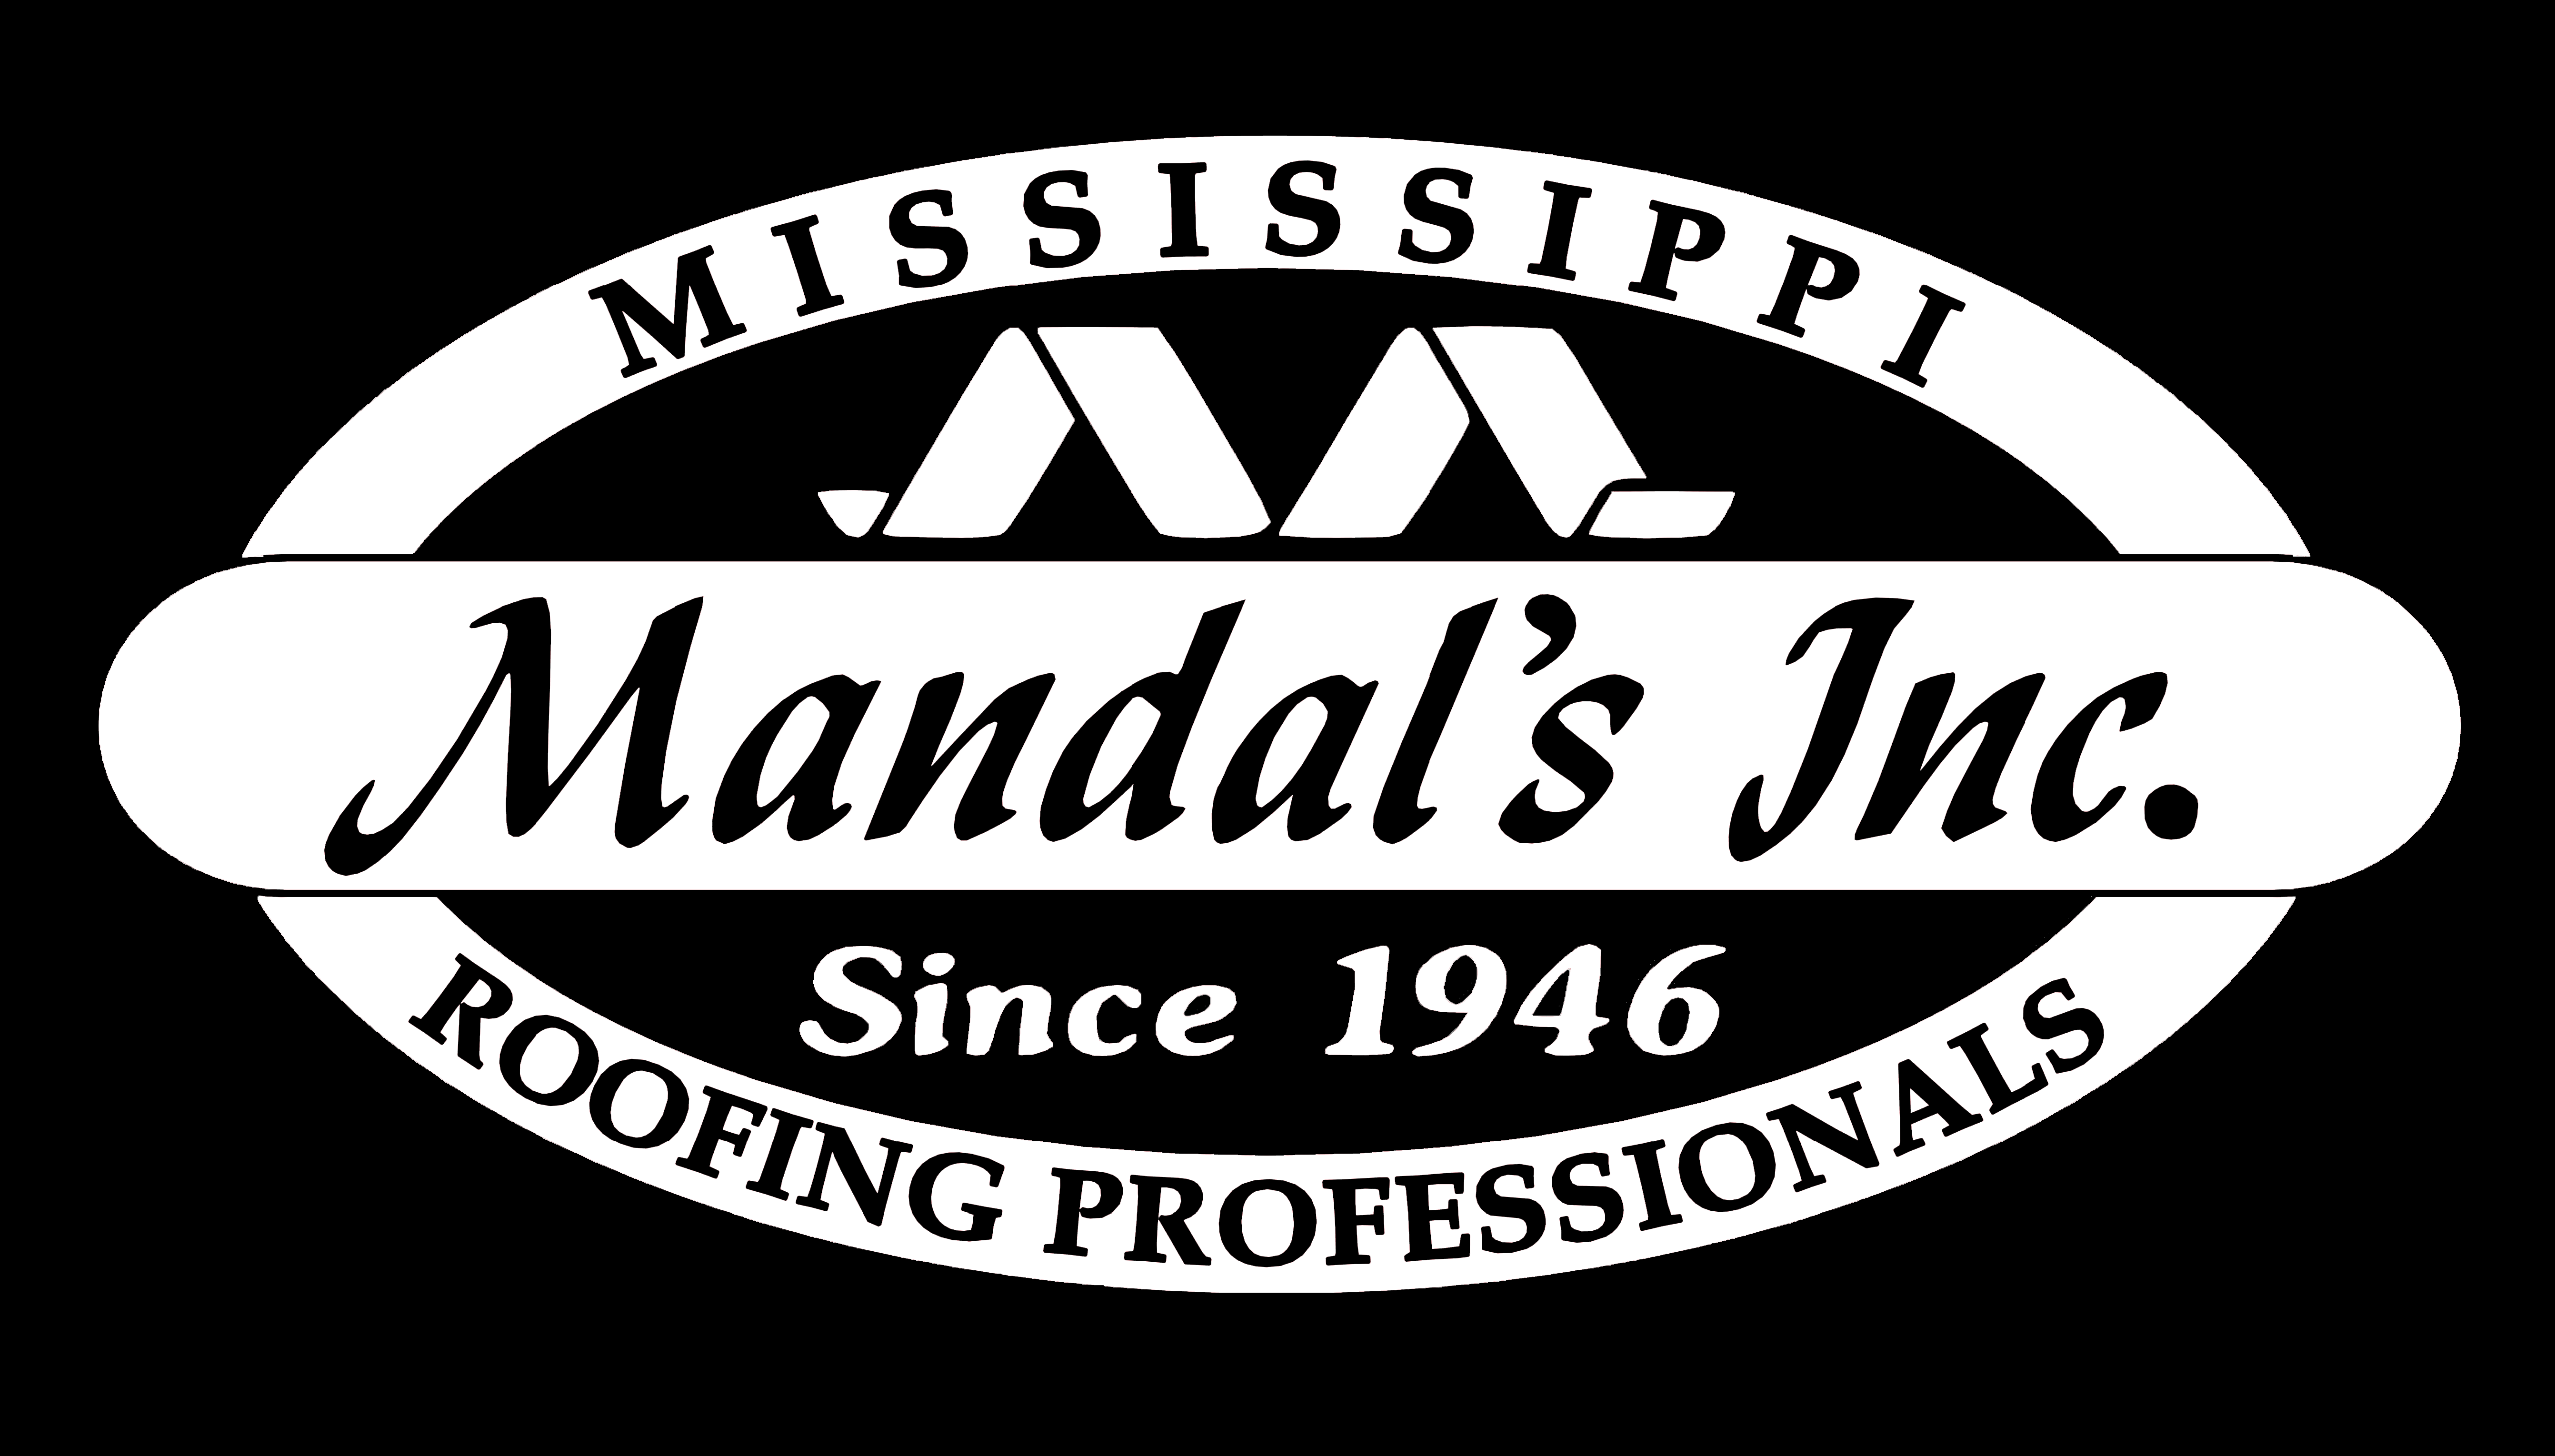 Mandal's Inc. - Roofing Contractors in USA - Polyglass U.S.A., Inc.